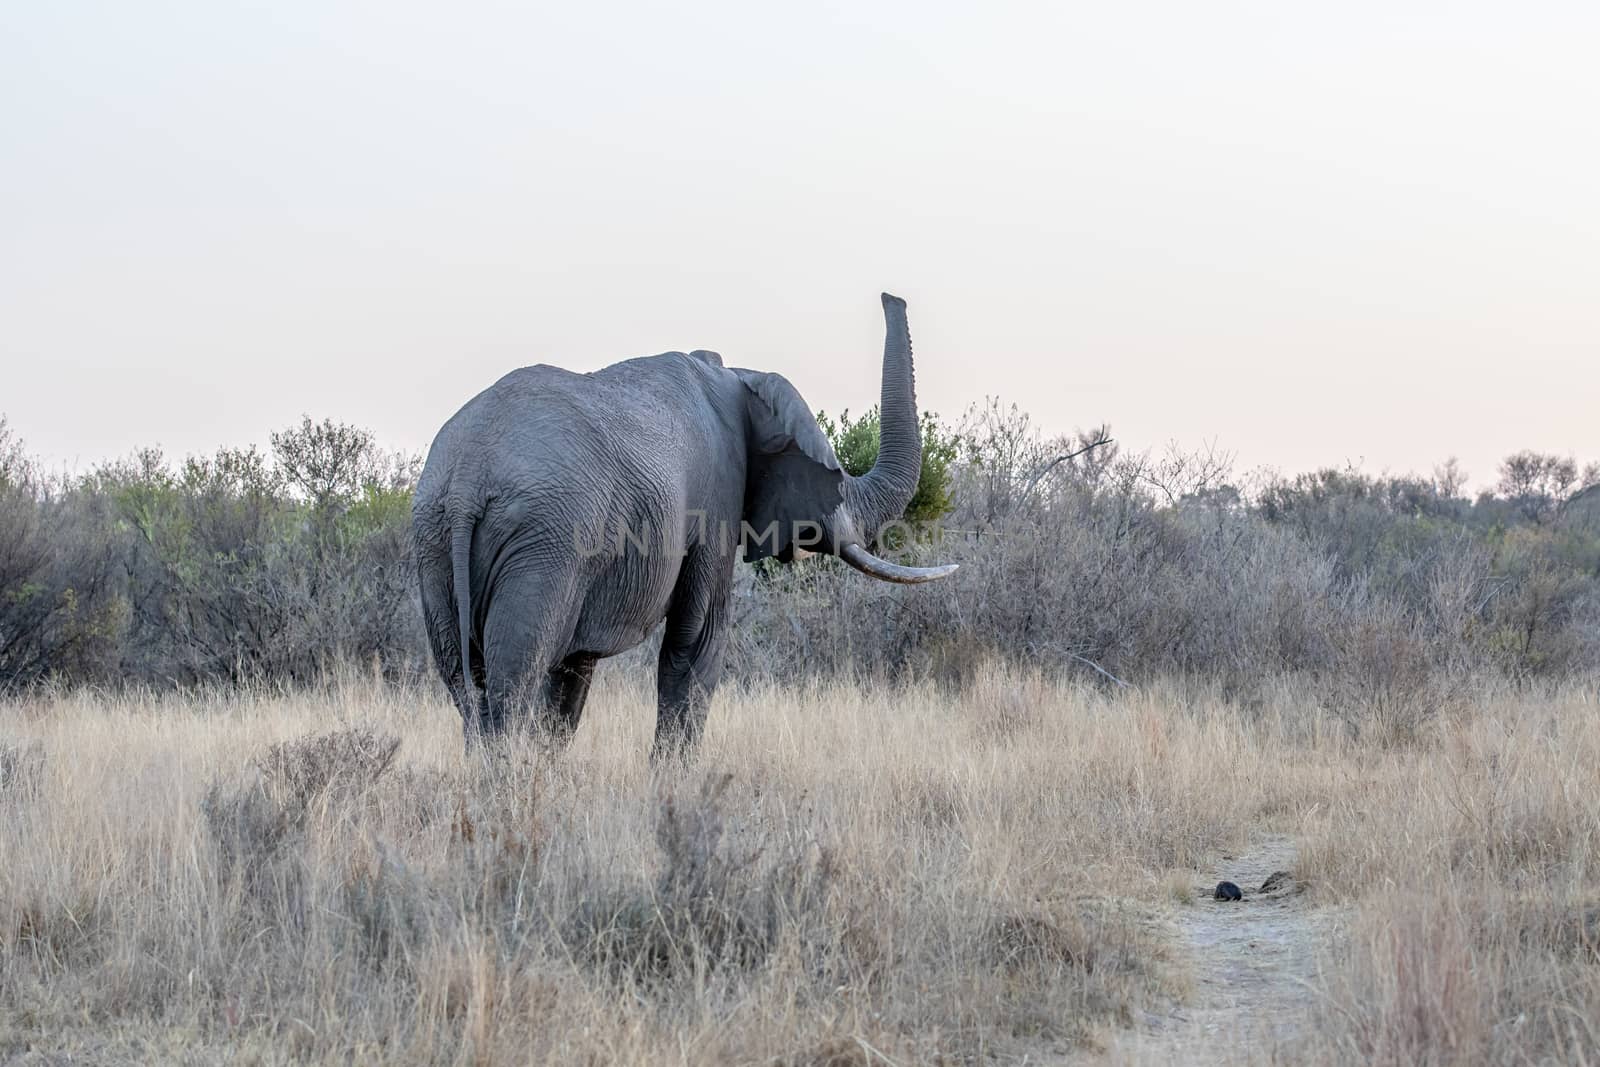 Big Elephant bull smelling with his trunk in the Welgevonden game reserve, South Africa.